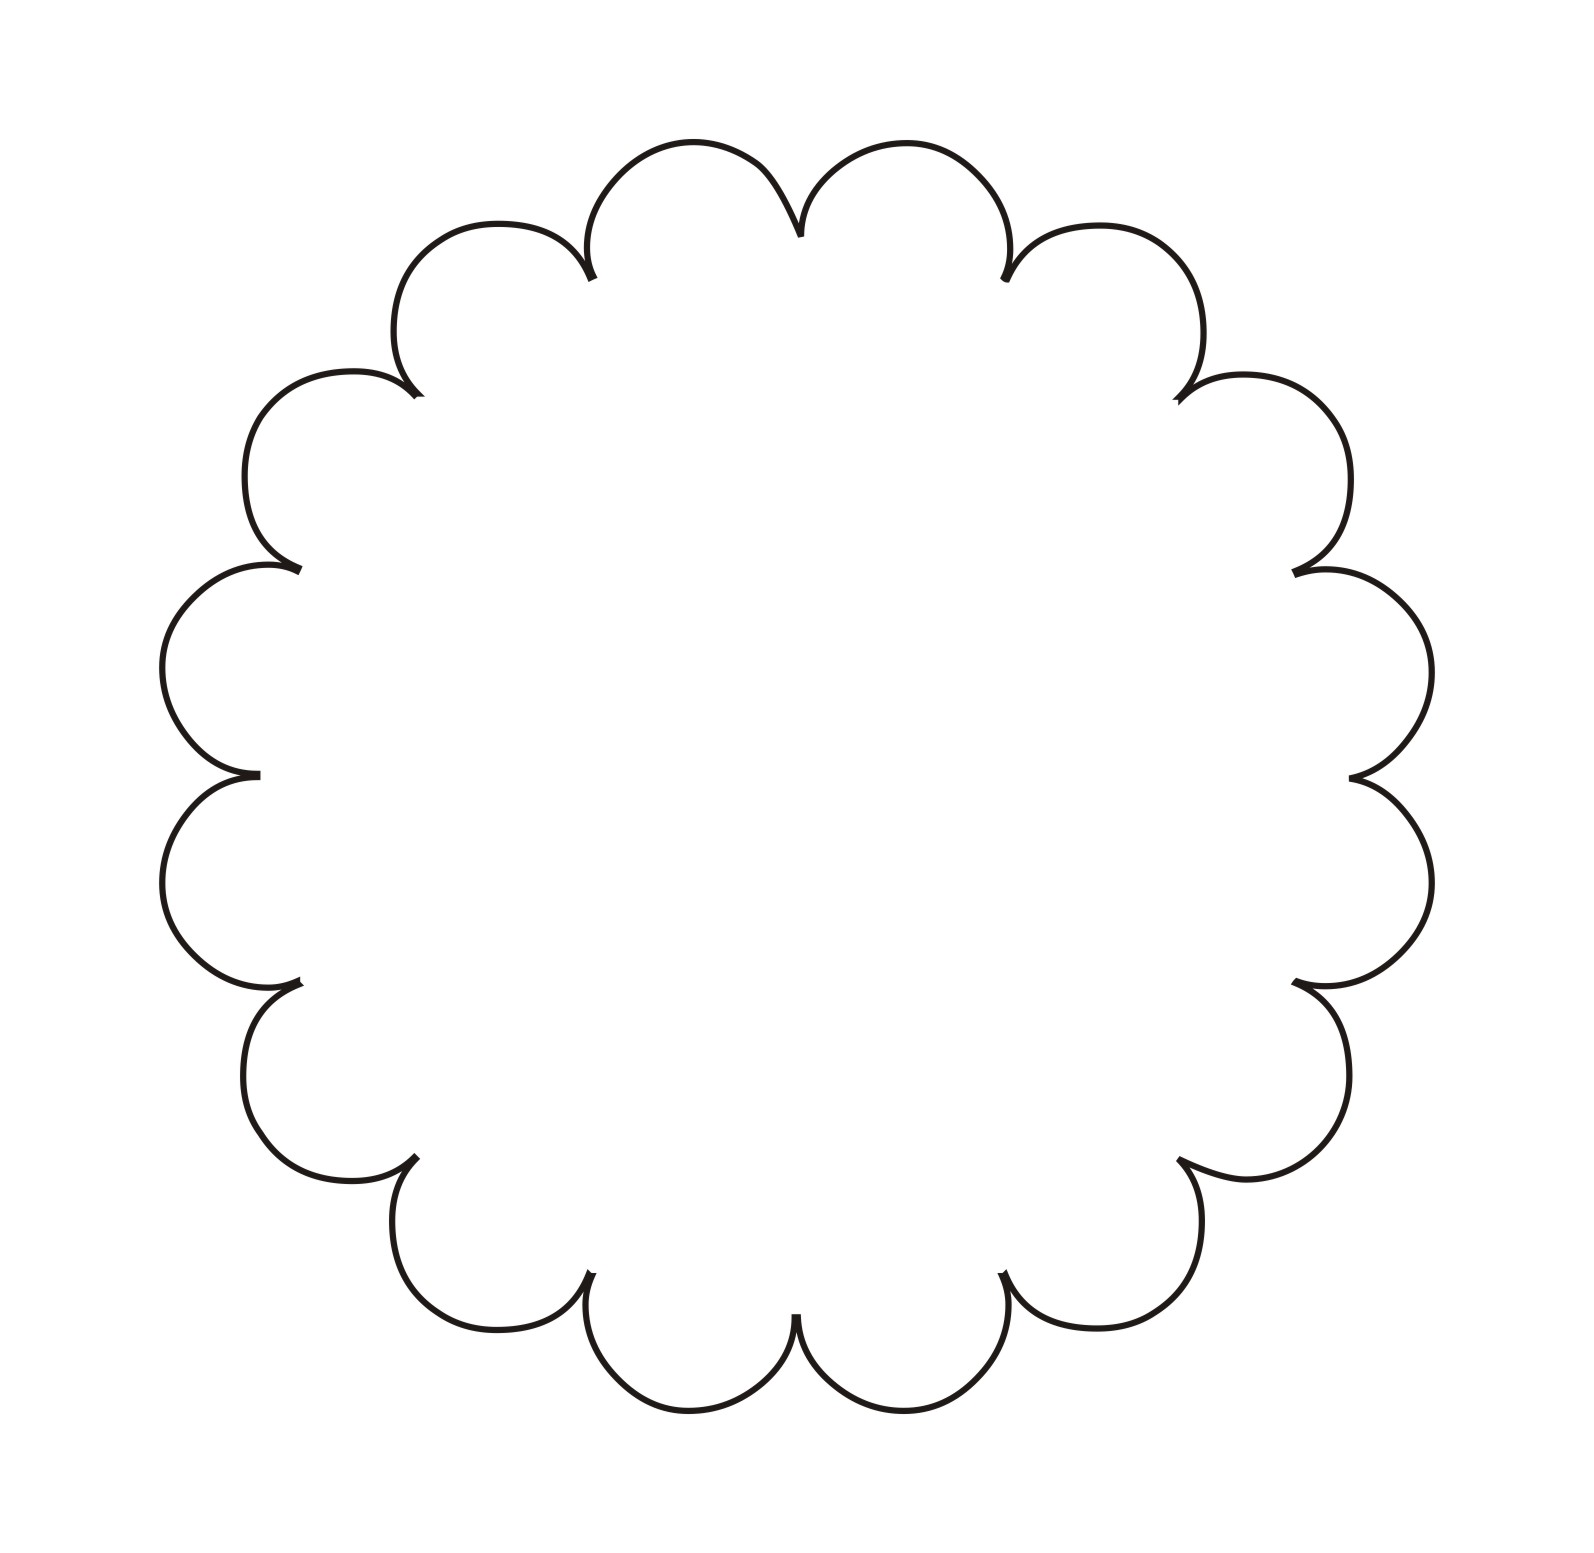 7 Best Images of Free Printable Flower Shape Templates - Scalloped ...